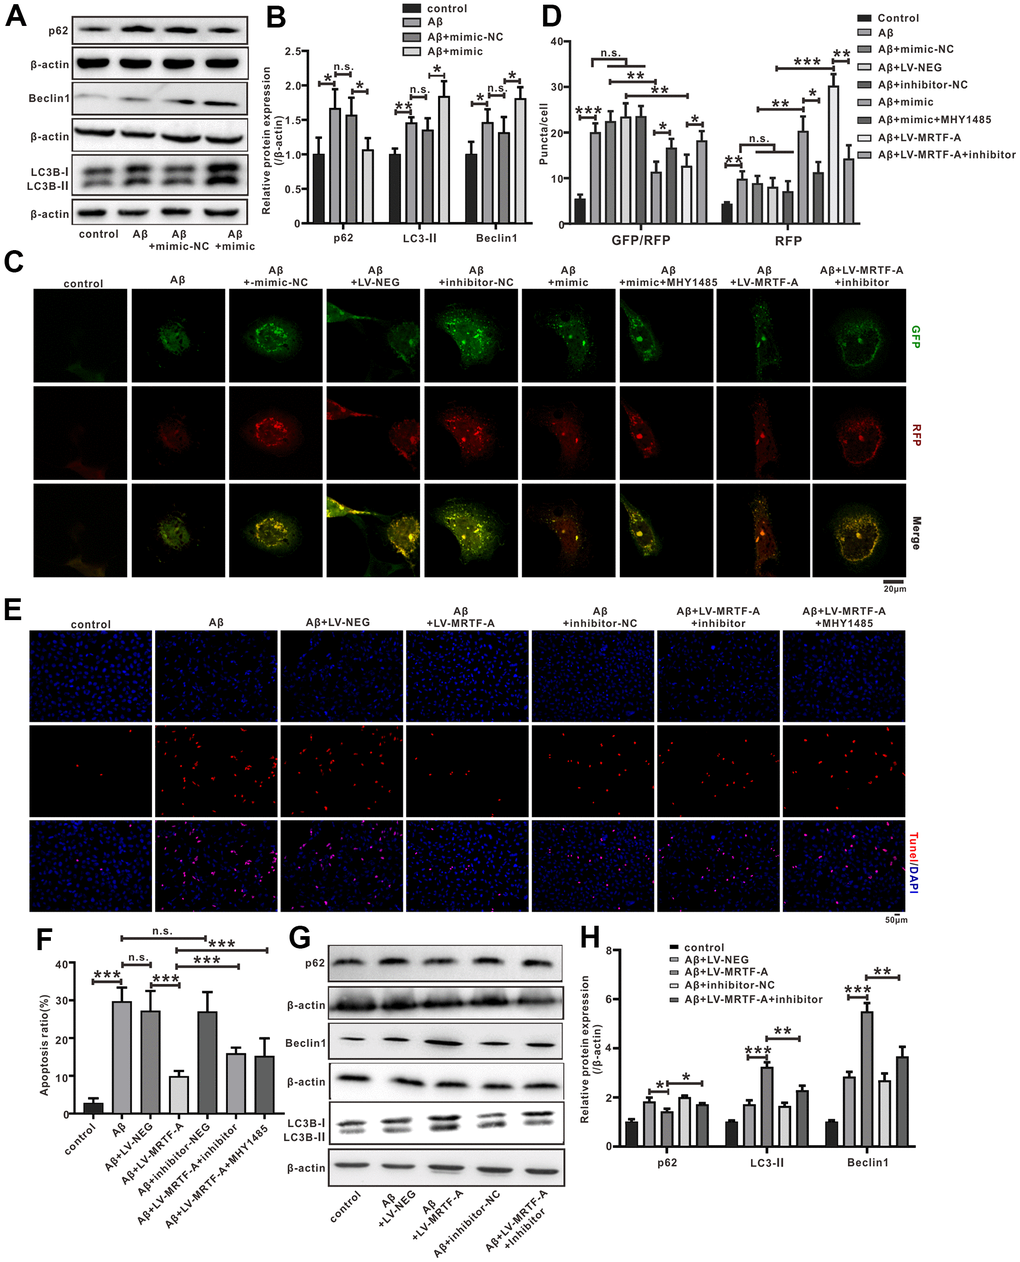 The miR-1273g-3p/mTOR axis involved in MRTF-A against Aβ-induced autophagy impairment and neuronal apoptosis in SH-SY5Y cells. (A, B) LC3II, Beclin1 and p62 level was upregulated by miR-1273g-3p. (C, D) The autophagy flux analysis using Ad-mCherry-GFP-LC3B-tagged protein. (E, F) TUNEL staining for cell apoptosis. (G, H) LC3II, Beclin1 and p62 level was upregulated by MRTF-A. Data represent means ± SEM of 3 independent experiments. *PP P 